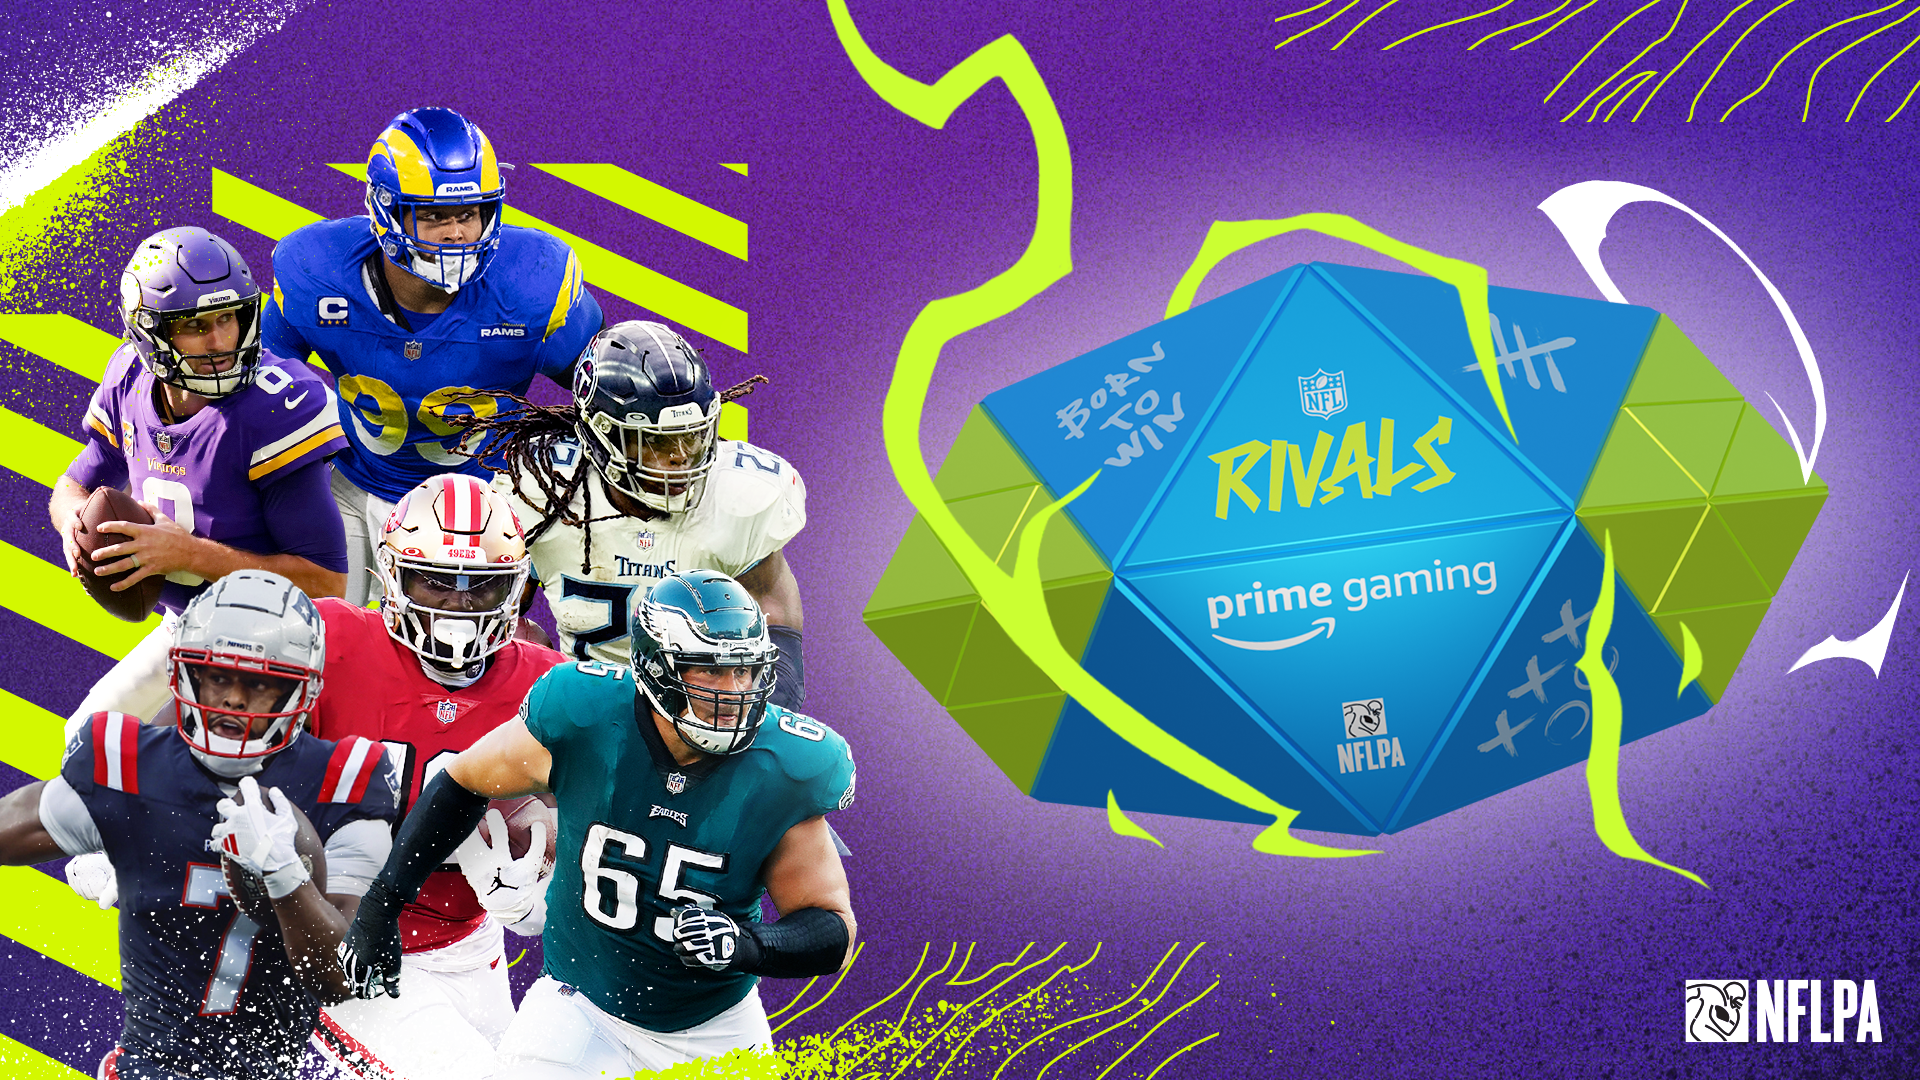 Mythical News - NFL Rivals Is Live on Prime Gaming